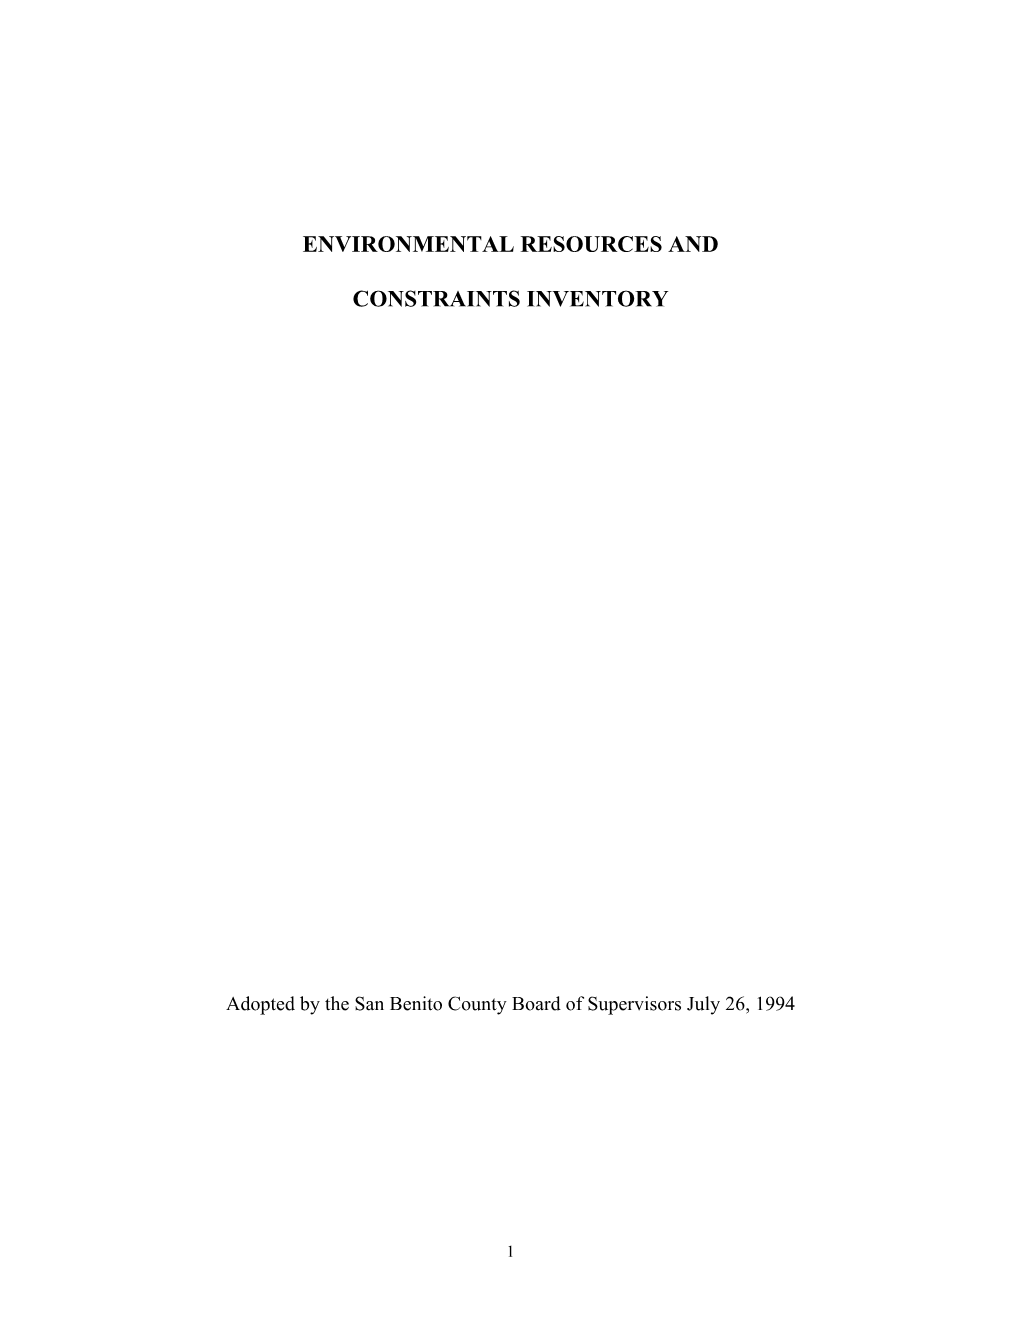 Environmental Resources and Constraints Inventory